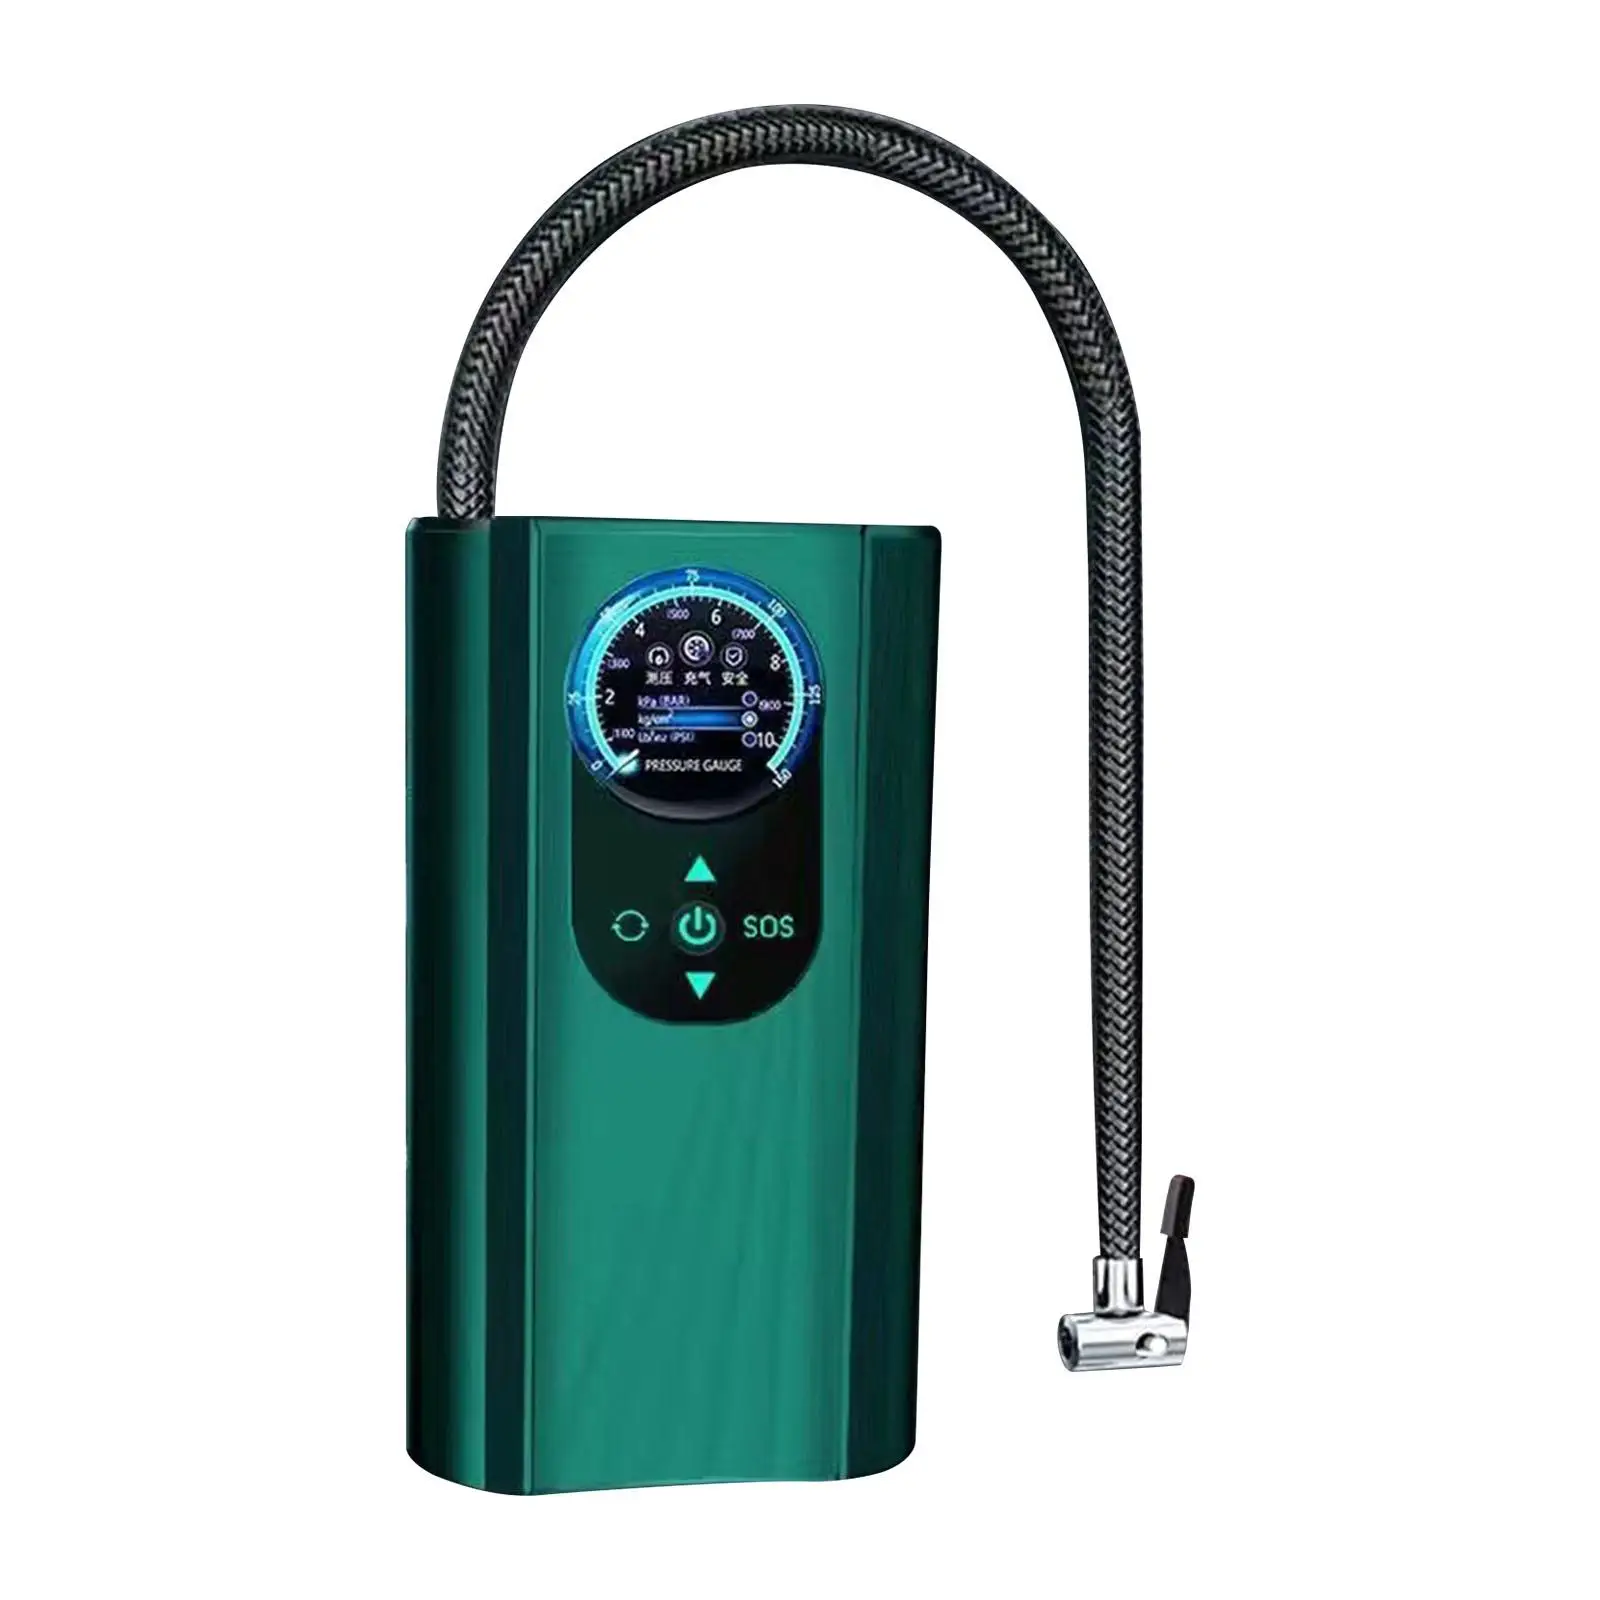 Portable Air Compressor Mini Auto Accessories with Pressure Gauge Electric Tire Pump for Bicycle Car Bike Ball Basketball